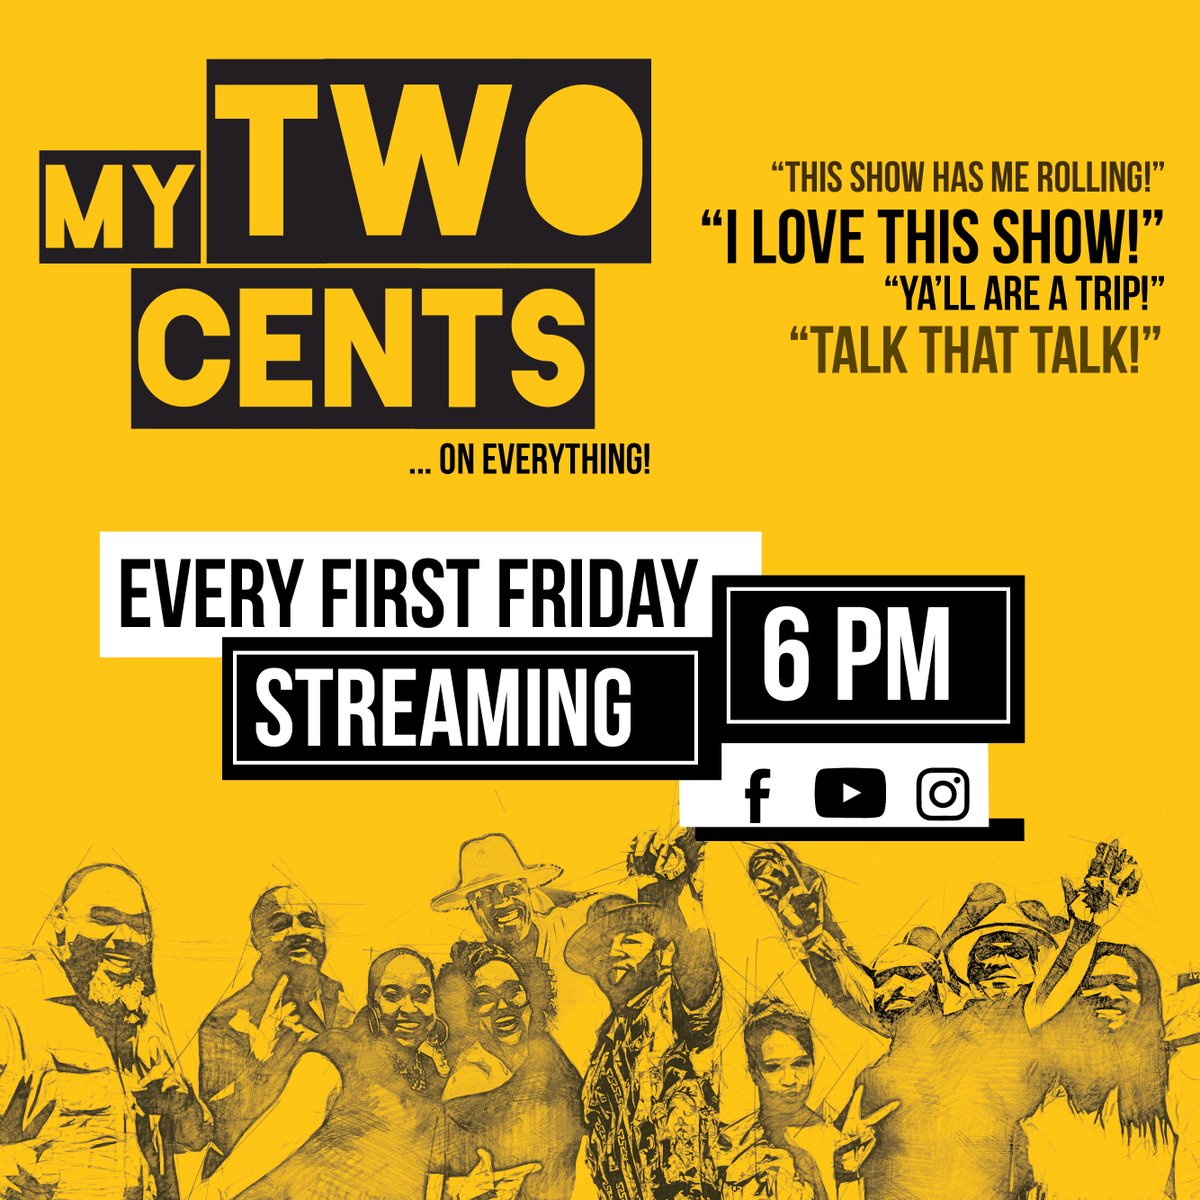 It's 1st Friday, the crew is chopping it up tonight at 6 PM. My TWO Cents - Facebook Live #theculture #firstfriday #podcast #mytwocents